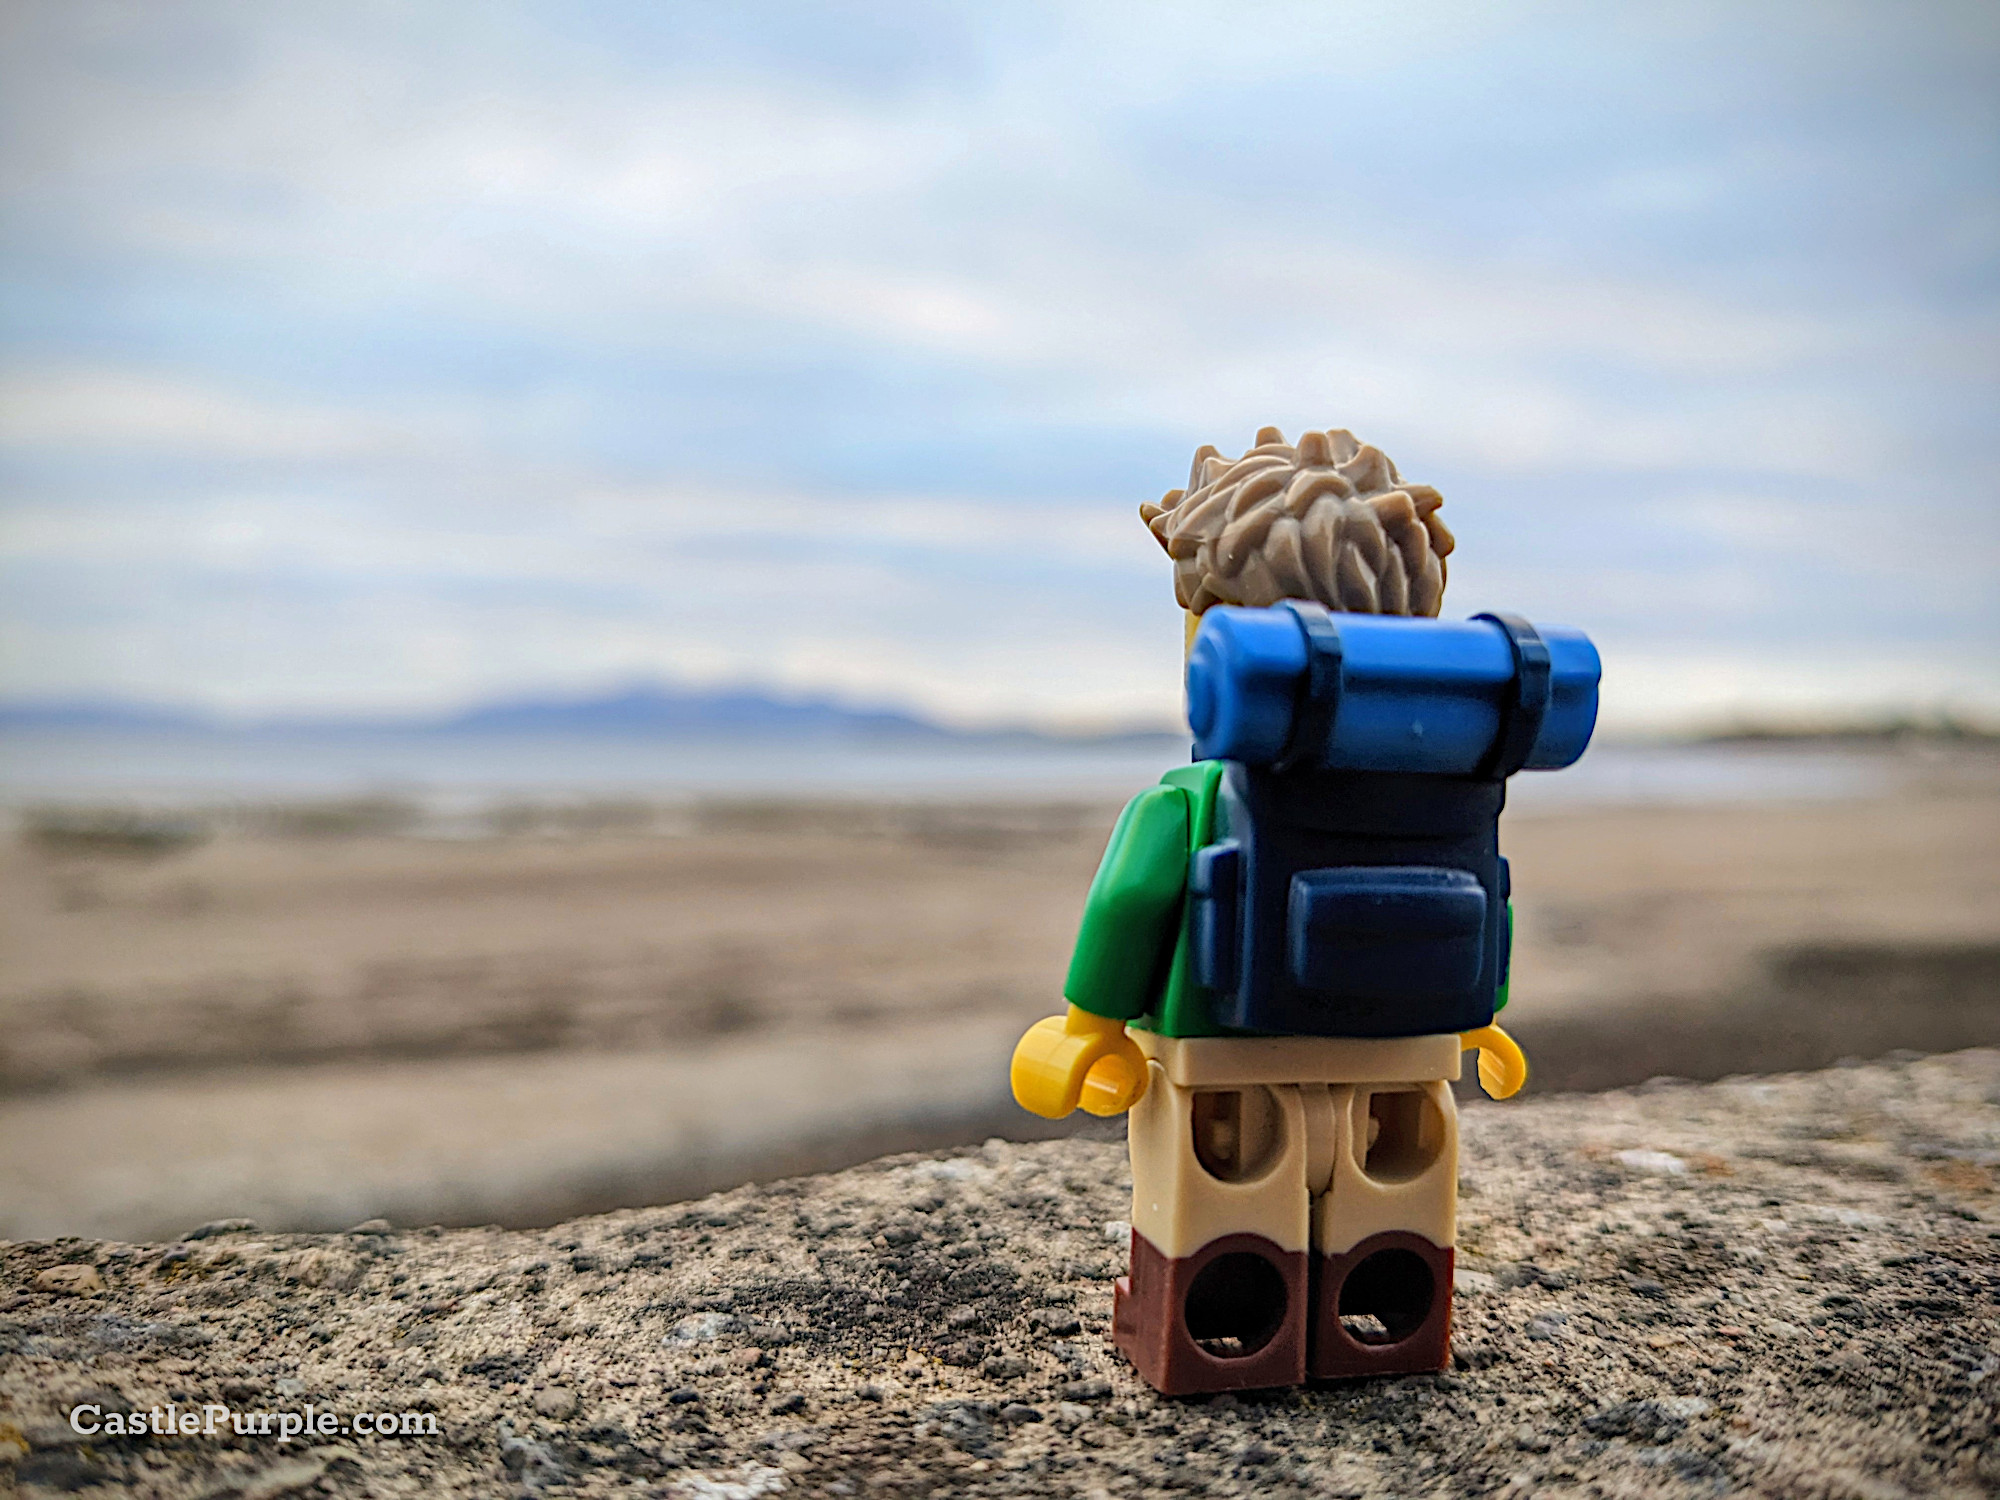 The Lego 'Hiker' minifigure stands with his back to the view gazing out over a beach toward a distant island.